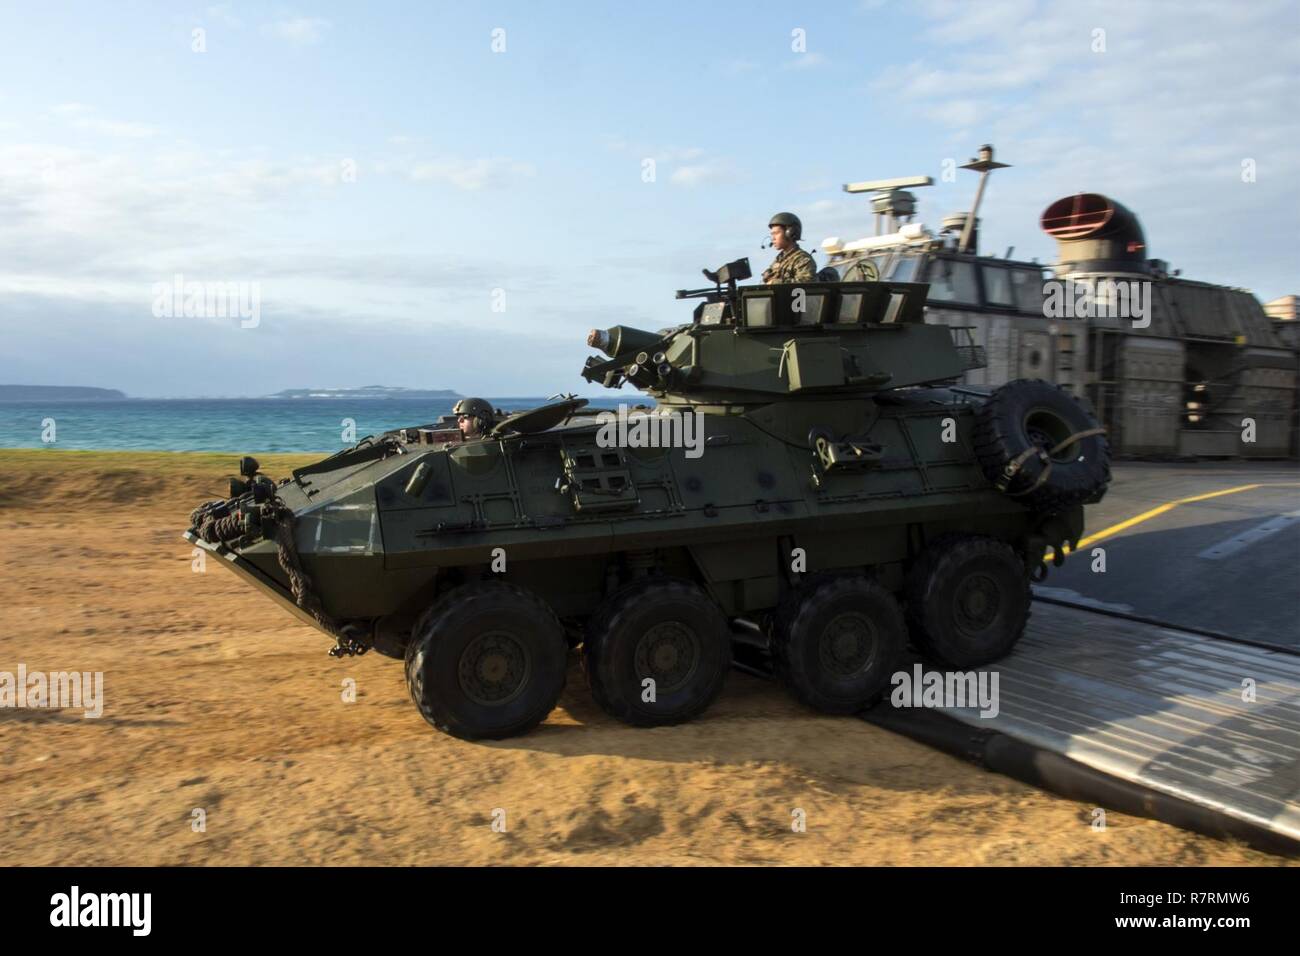 KIN BLUE BEACH, Okinawa (April 5, 2017) Marines, assigned to the 31st Marine Expeditionary Unit (MEU), disembark a light armored vehicle (LAV) from landing craft air cushion (LCAC) 29, assigned to Naval Beach Unit (NBU) 7, during a 31st Marine Expeditionary Unit (MEU) offload from the amphibious assault ship USS Bonhomme Richard (LHD 6). Bonhomme Richard, flagship of the Bonhomme Richard Expeditionary Strike Group, with embarked 31st MEU, is on a patrol, operating in the Indo-Asia-Pacific region to enhance warfighting readiness and posture forward as a ready-response force for any type of cont Stock Photo